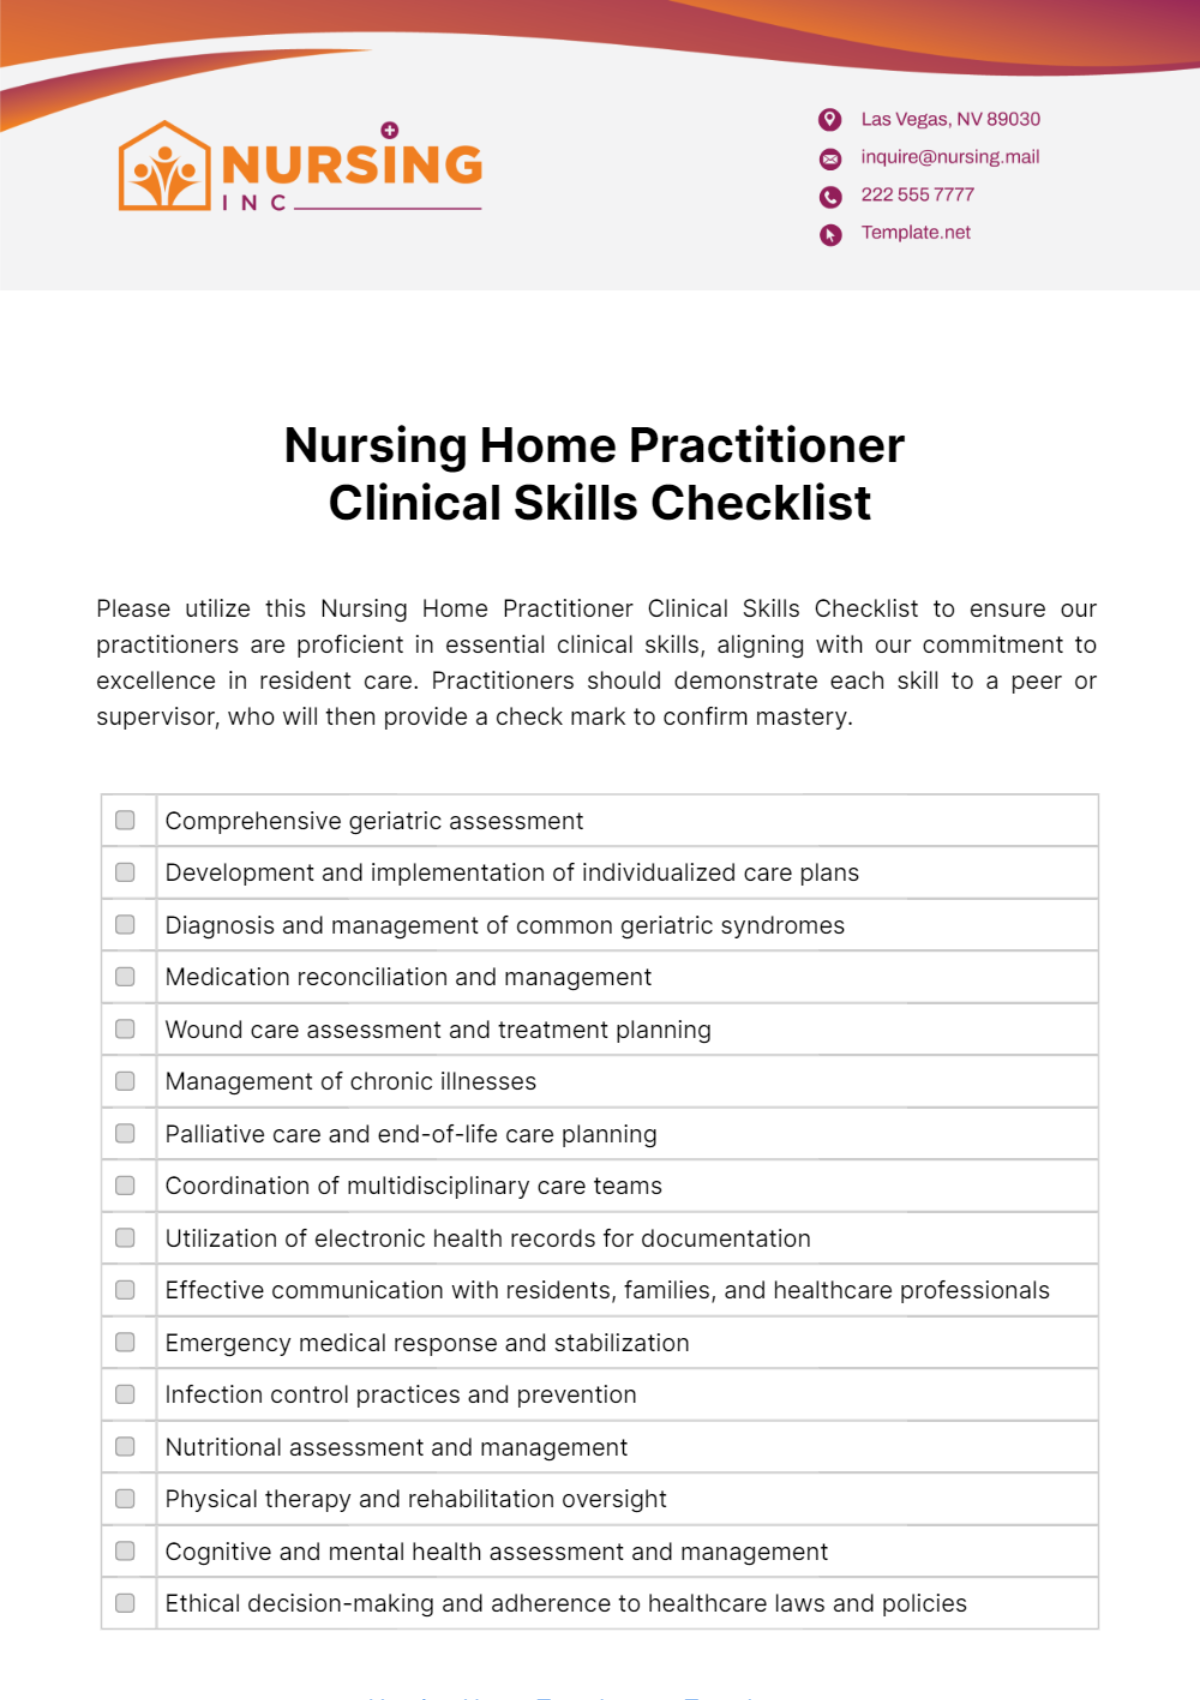 Free Nursing Home Practitioner Clinical Skills Checklist Template